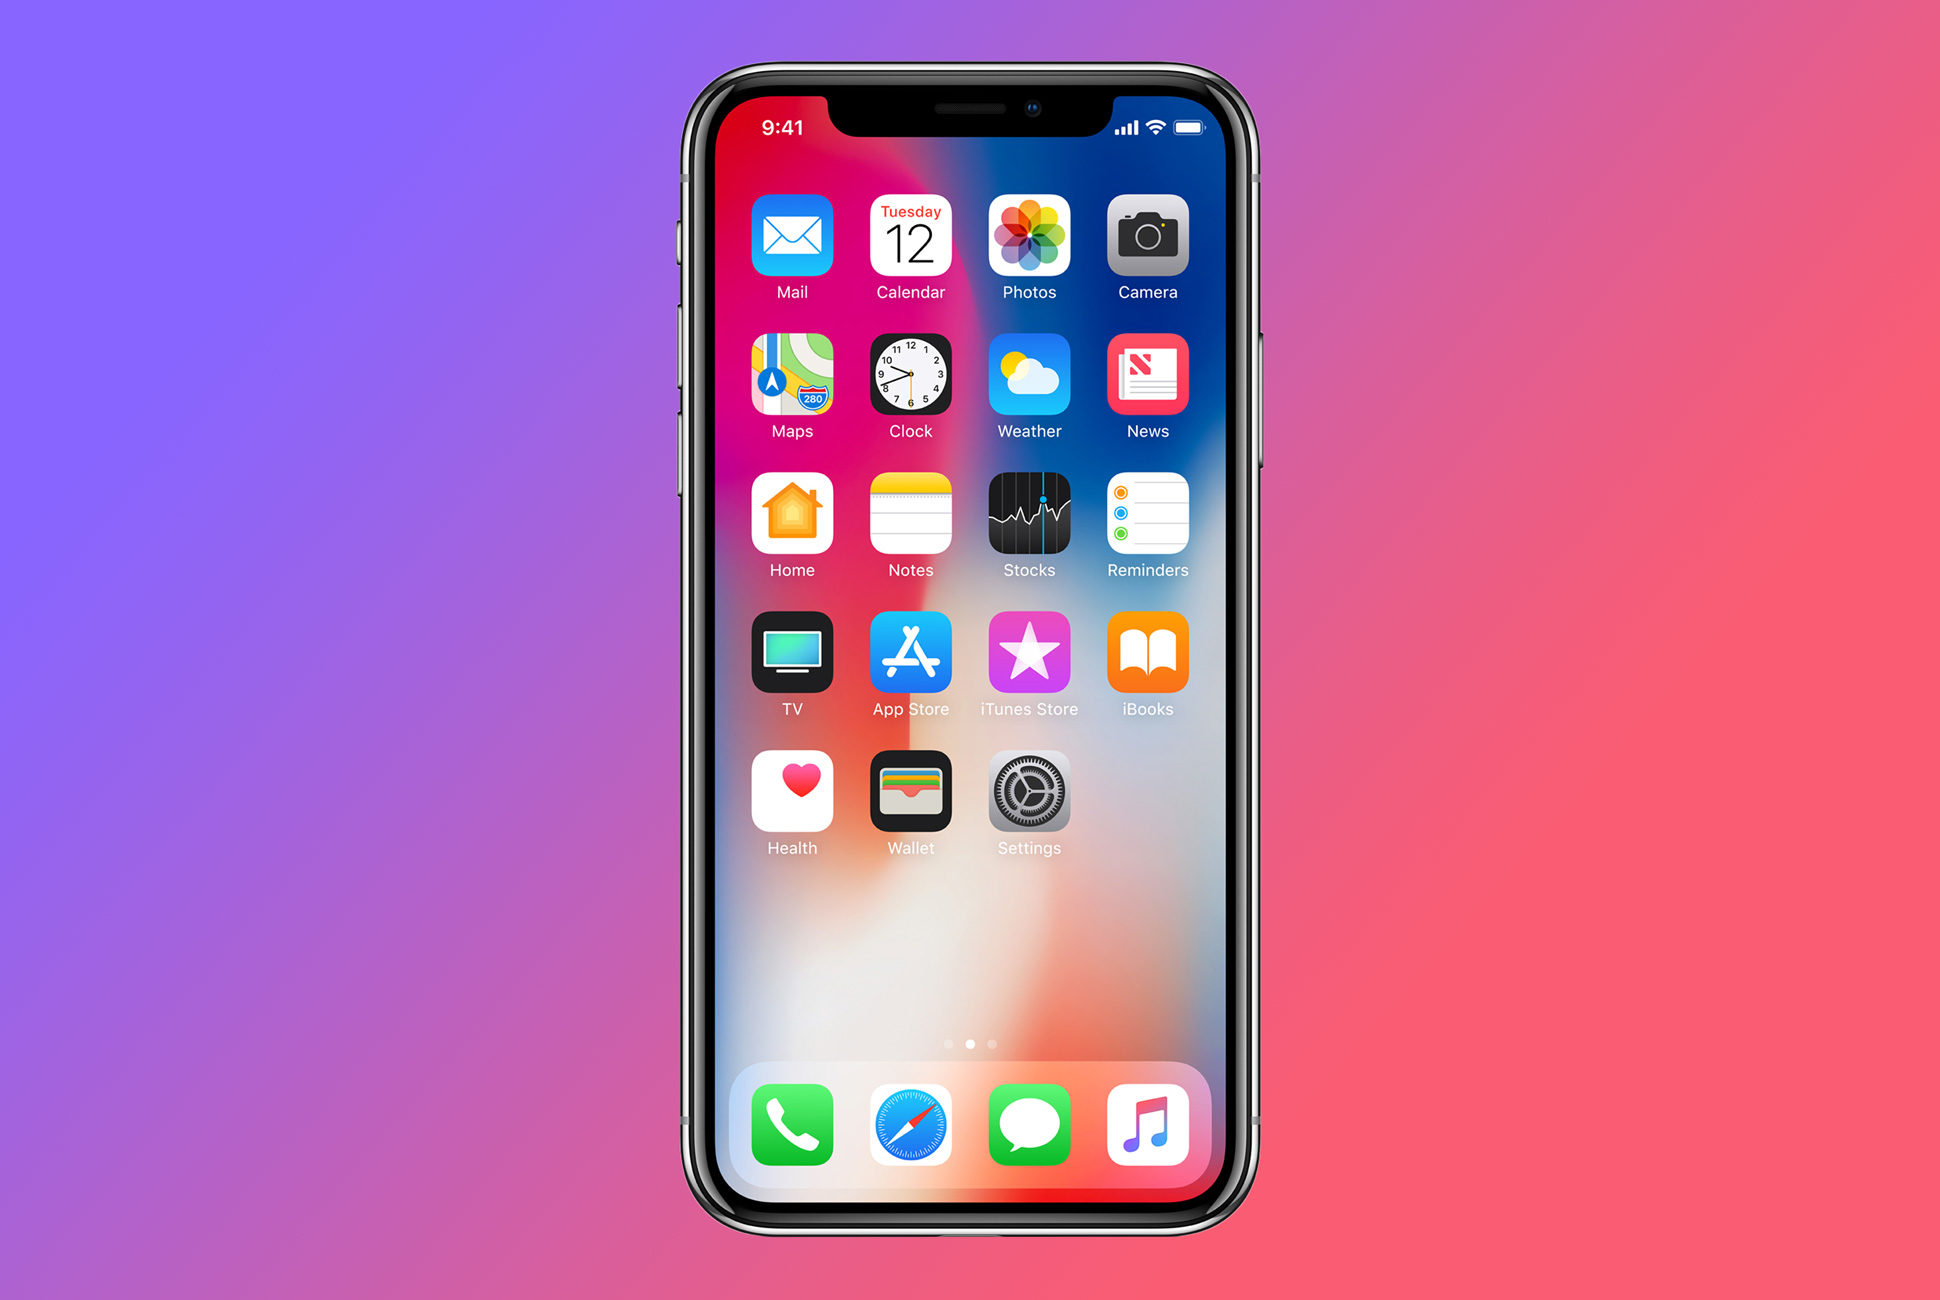 iPhone X Gear Patrol Slide 1 1940x1300 - Apple unveils the iPhone X with a futuristic edge to edge design